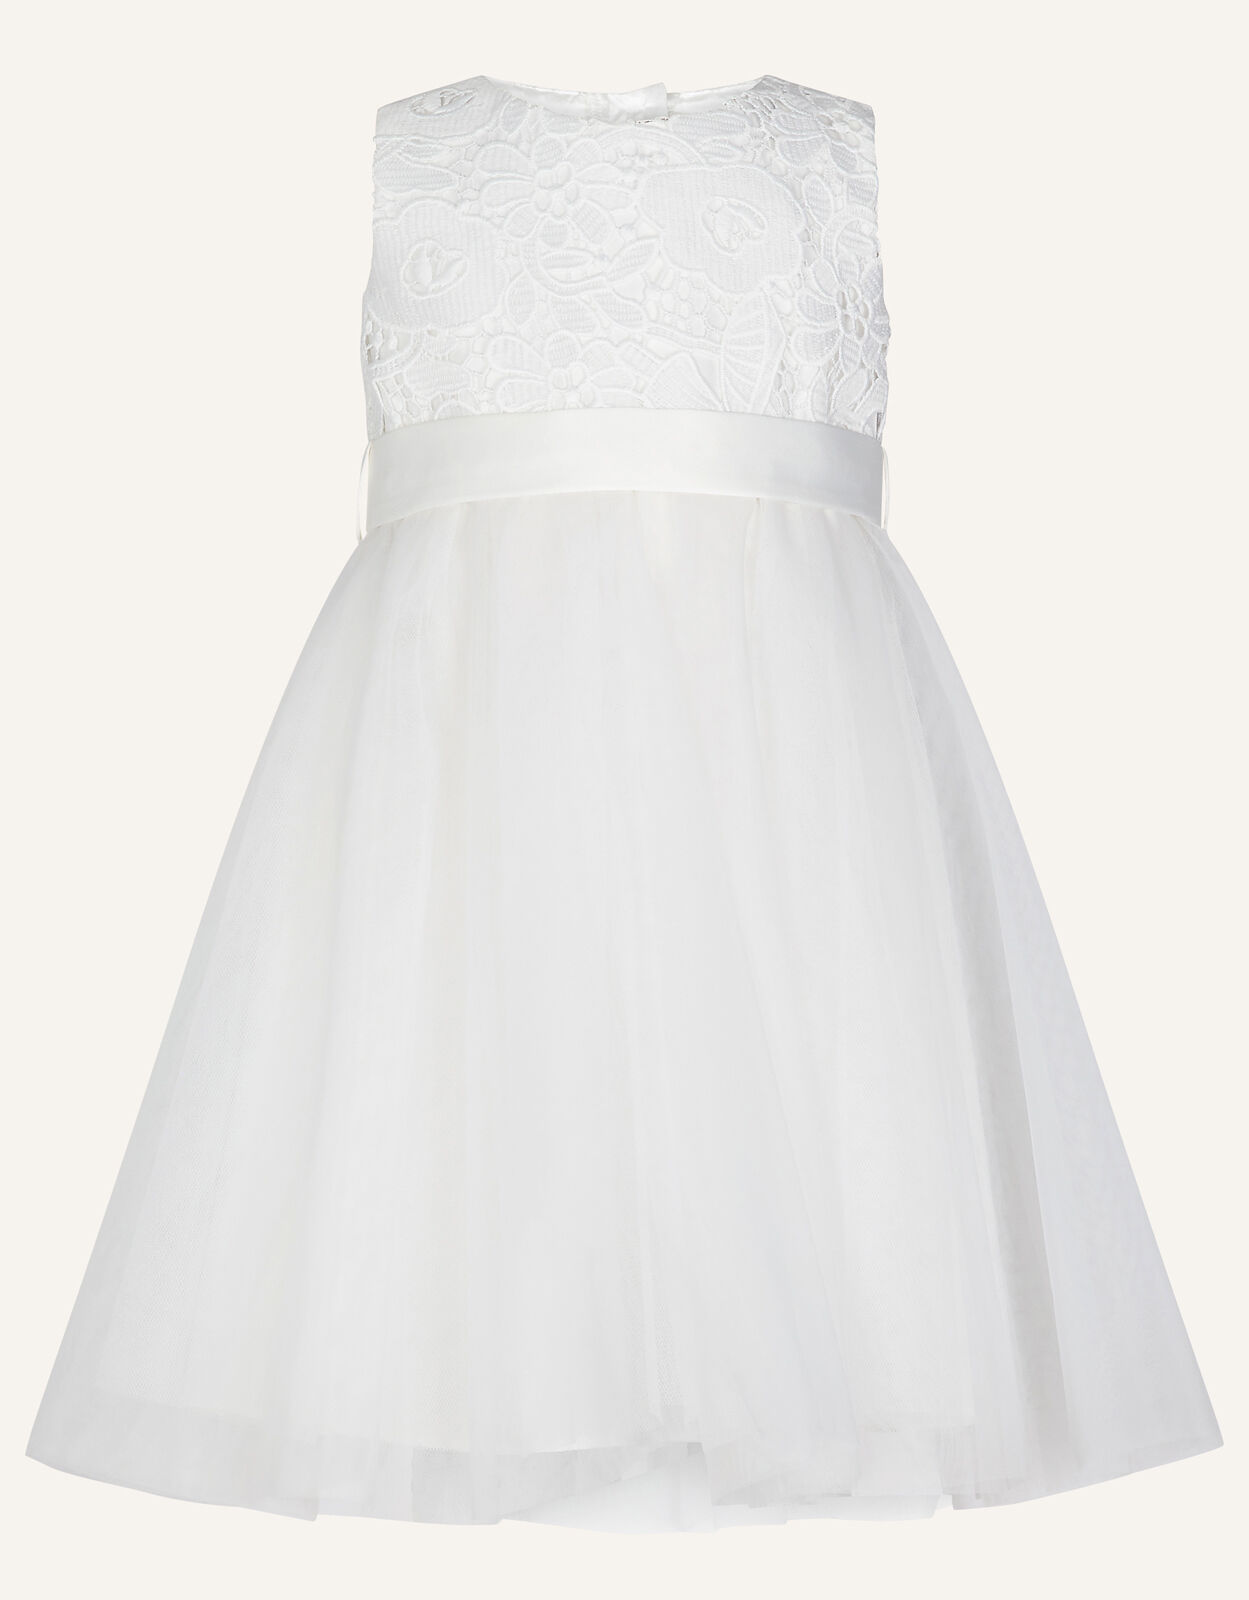 Christening Outfit | Baptism Gown - Newbie UK